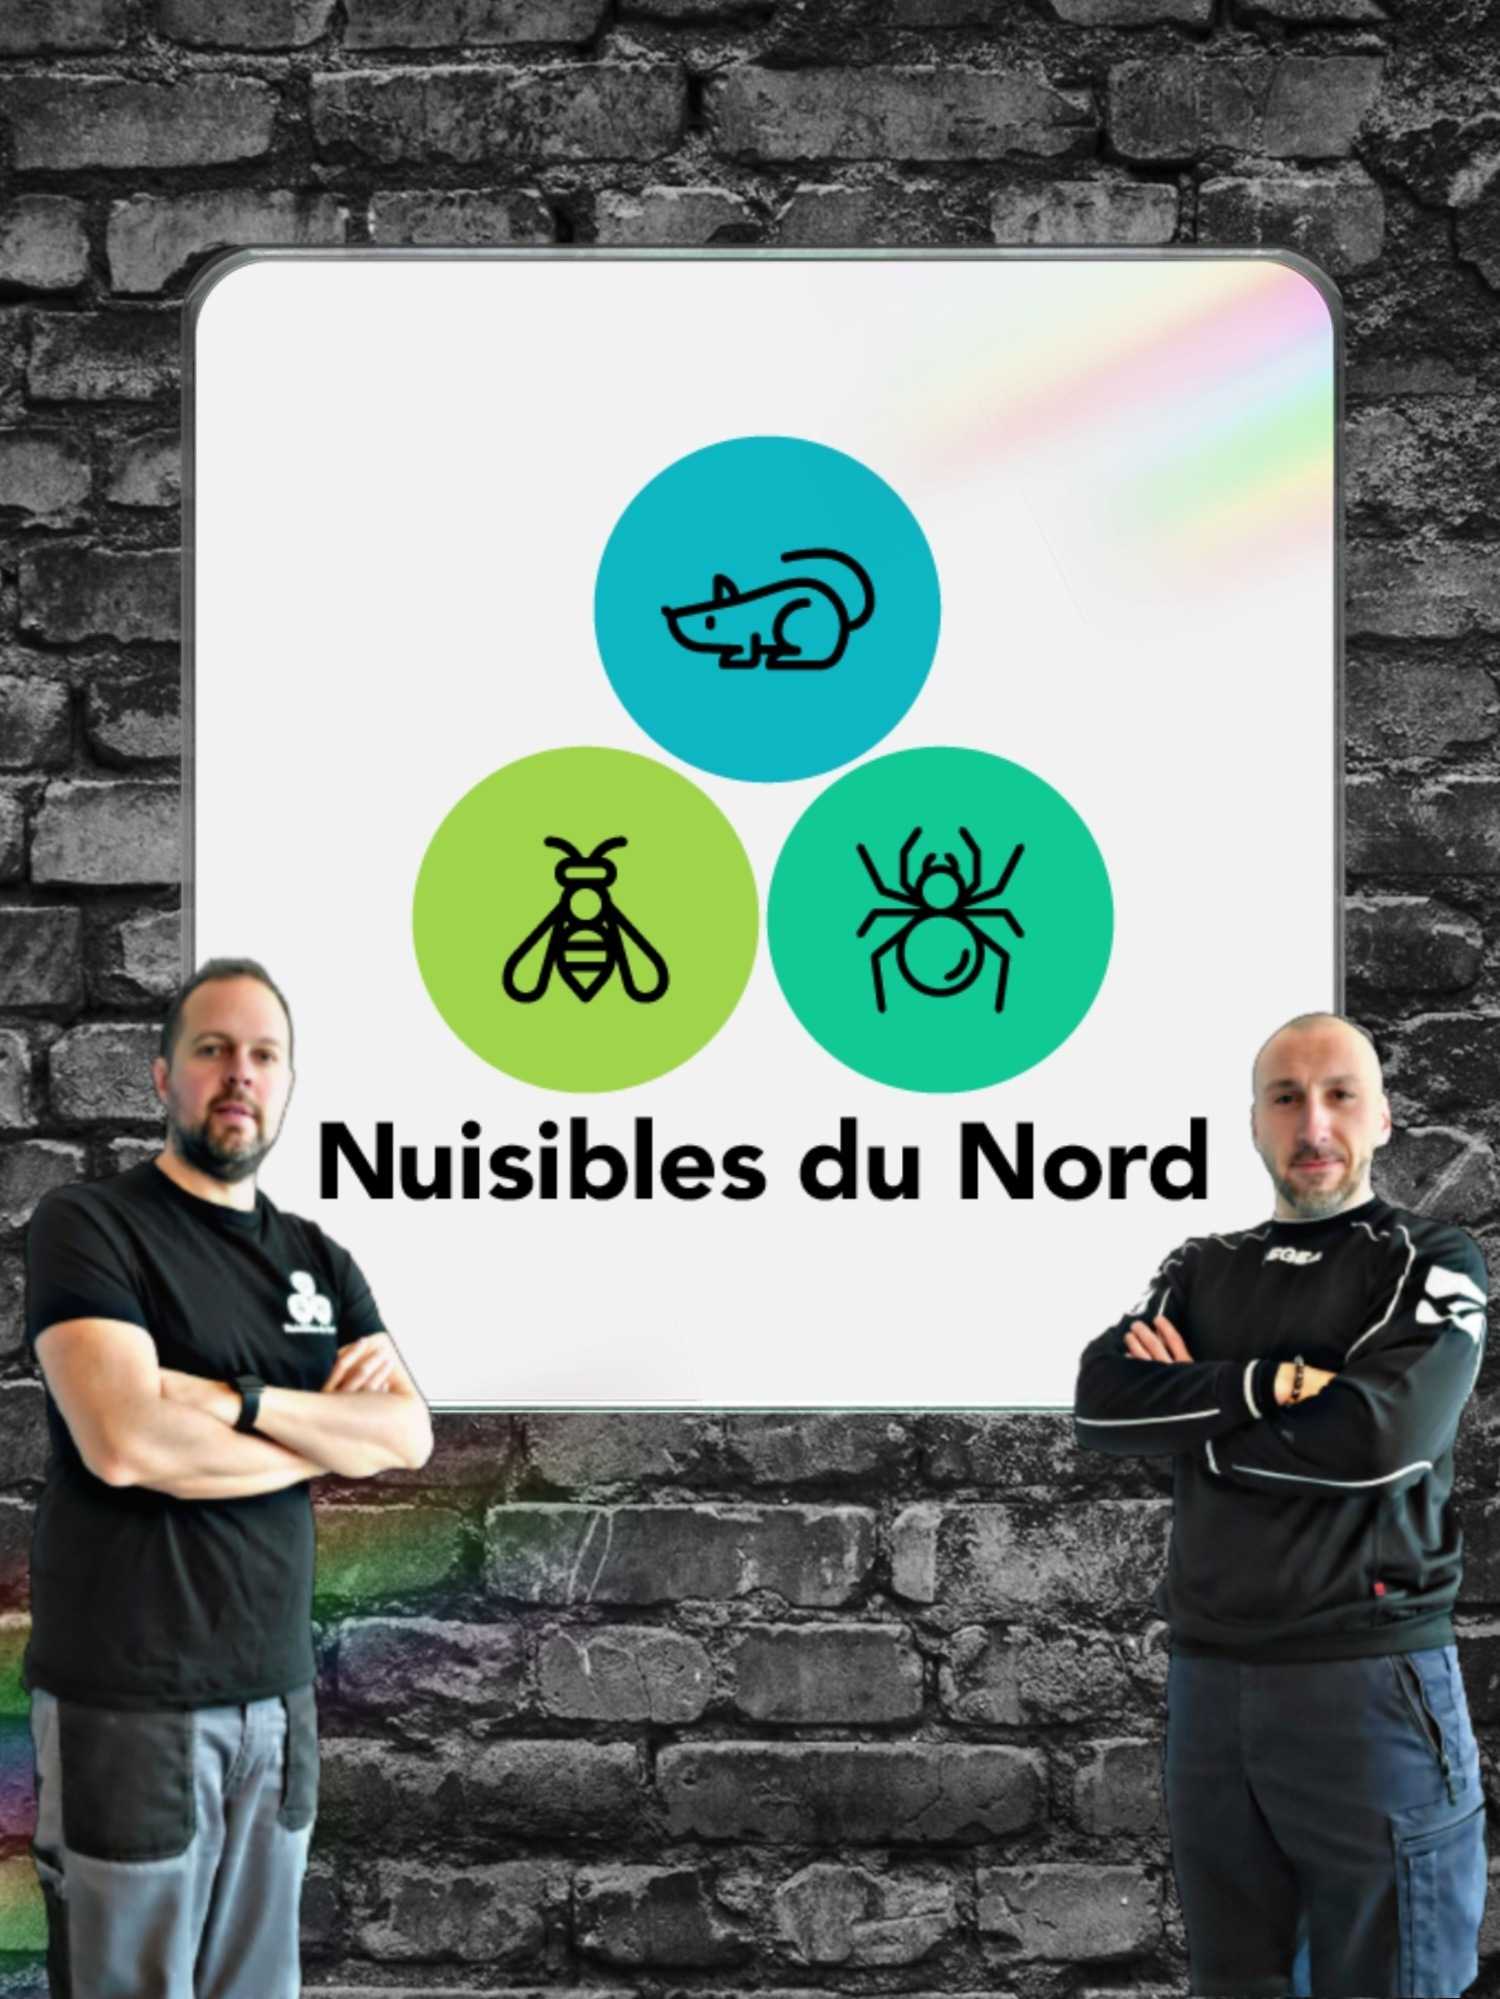 Nuisibles du Nord